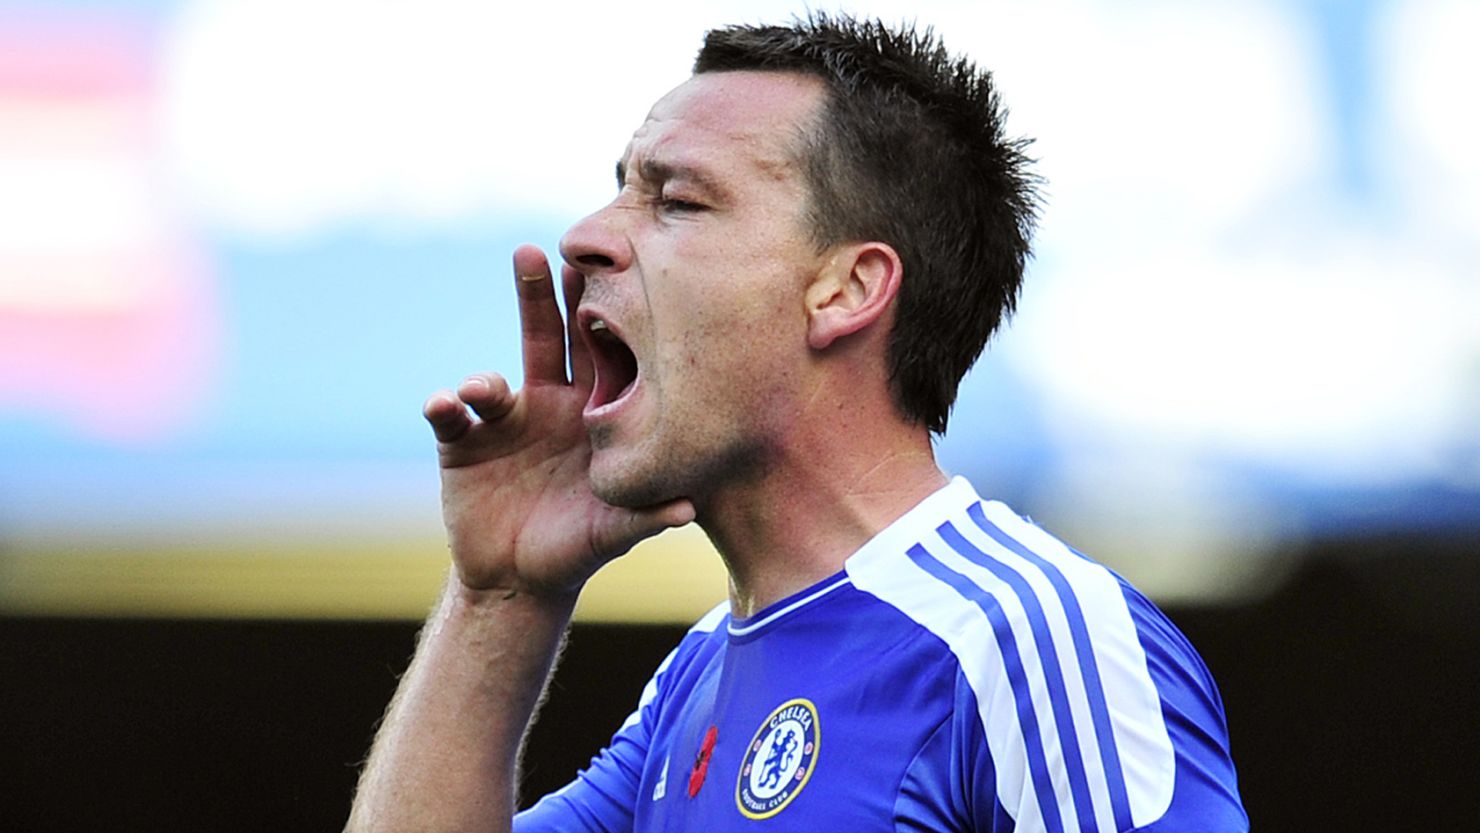 Chelsea defender John Terry shouts instructions during the English Premier League match against Arsenal on October 29.